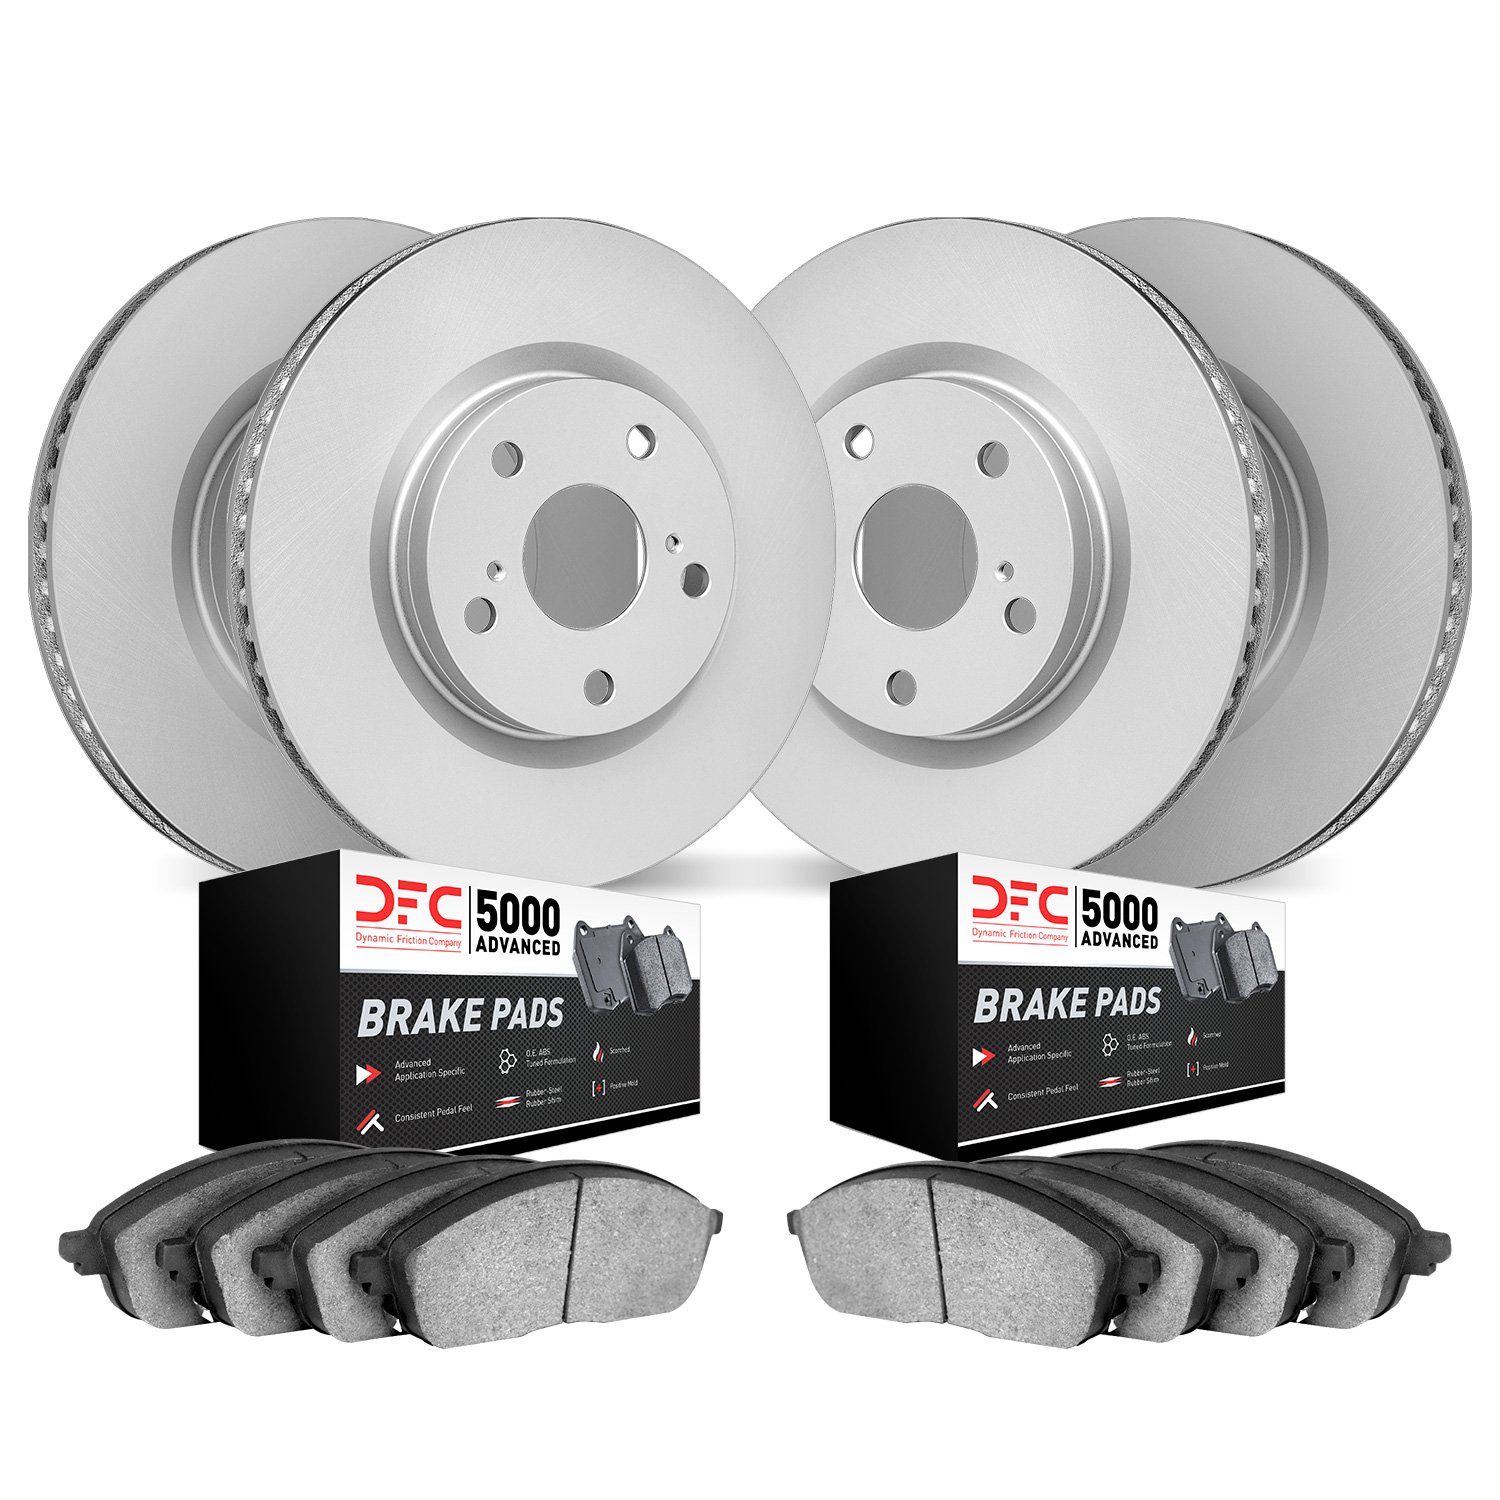 4504-46080 Geospec Brake Rotors w/5000 Advanced Brake Pads Kit, Fits Select GM, Position: Front and Rear